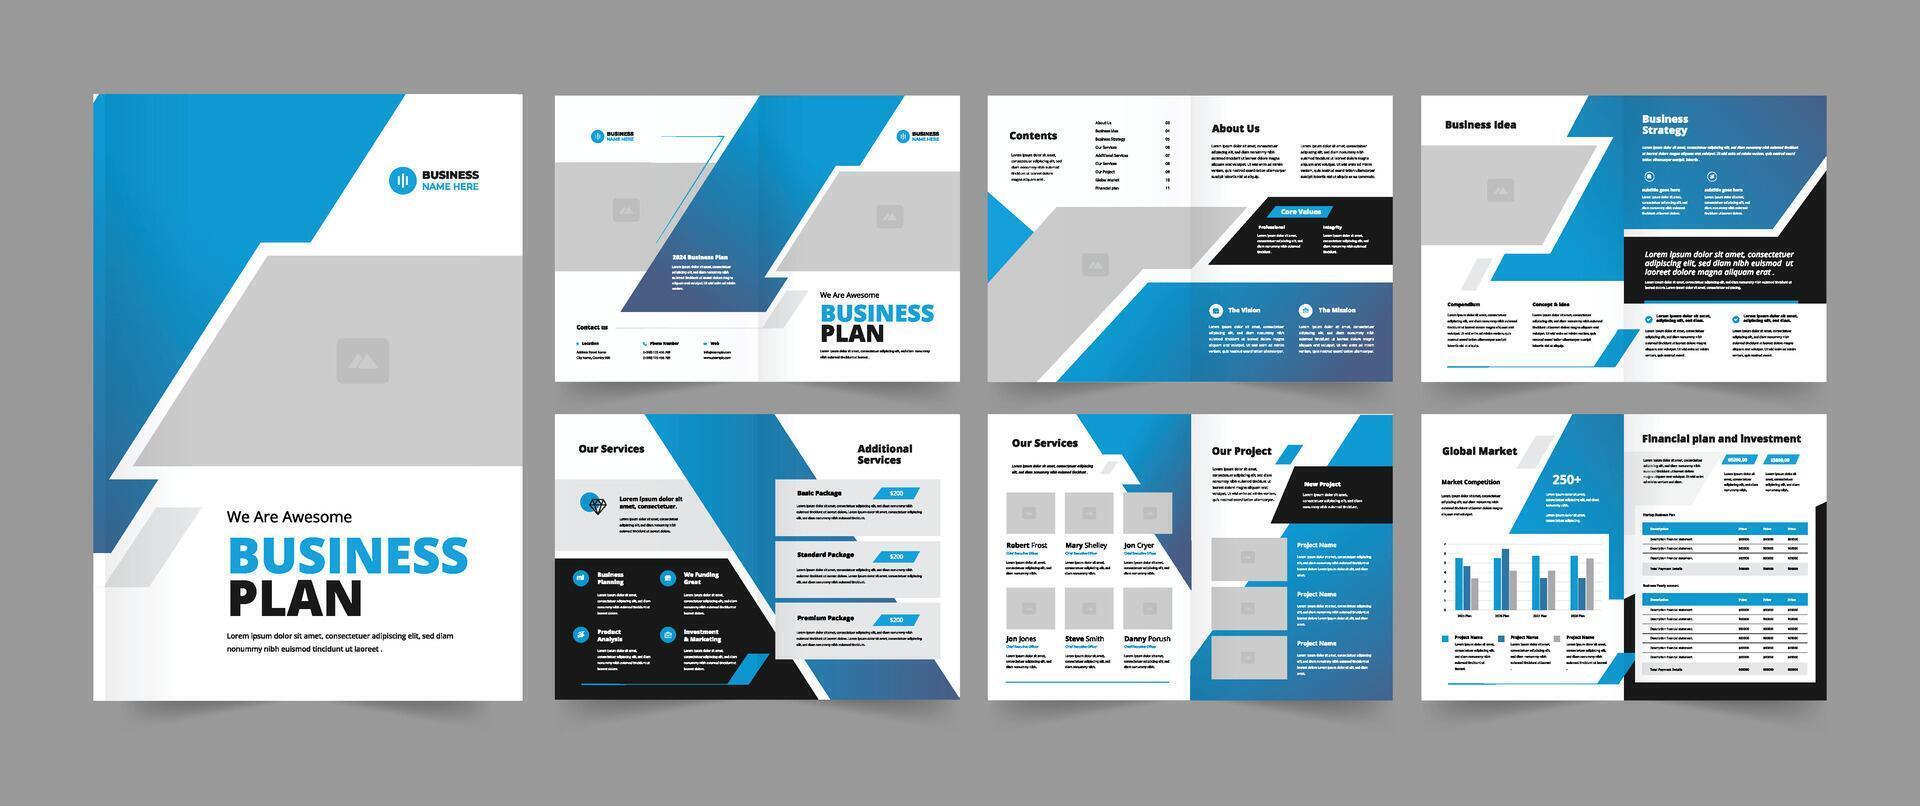 Business Plan or Company Plan Template vector